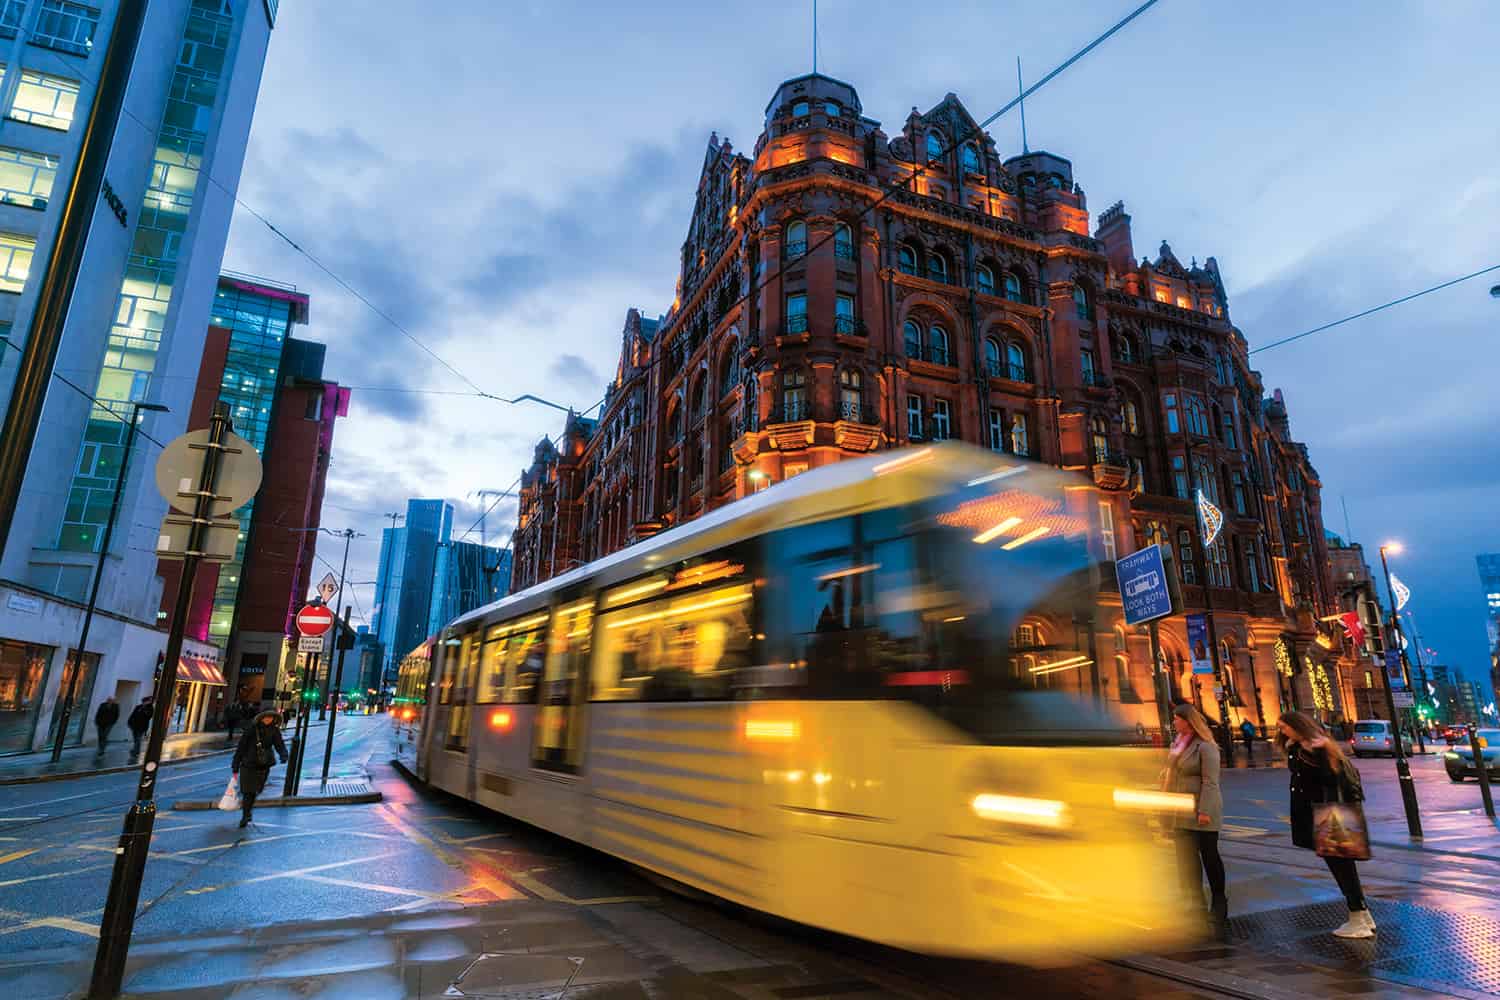 photo of moving, blurred tram in Manchester city centre, evening